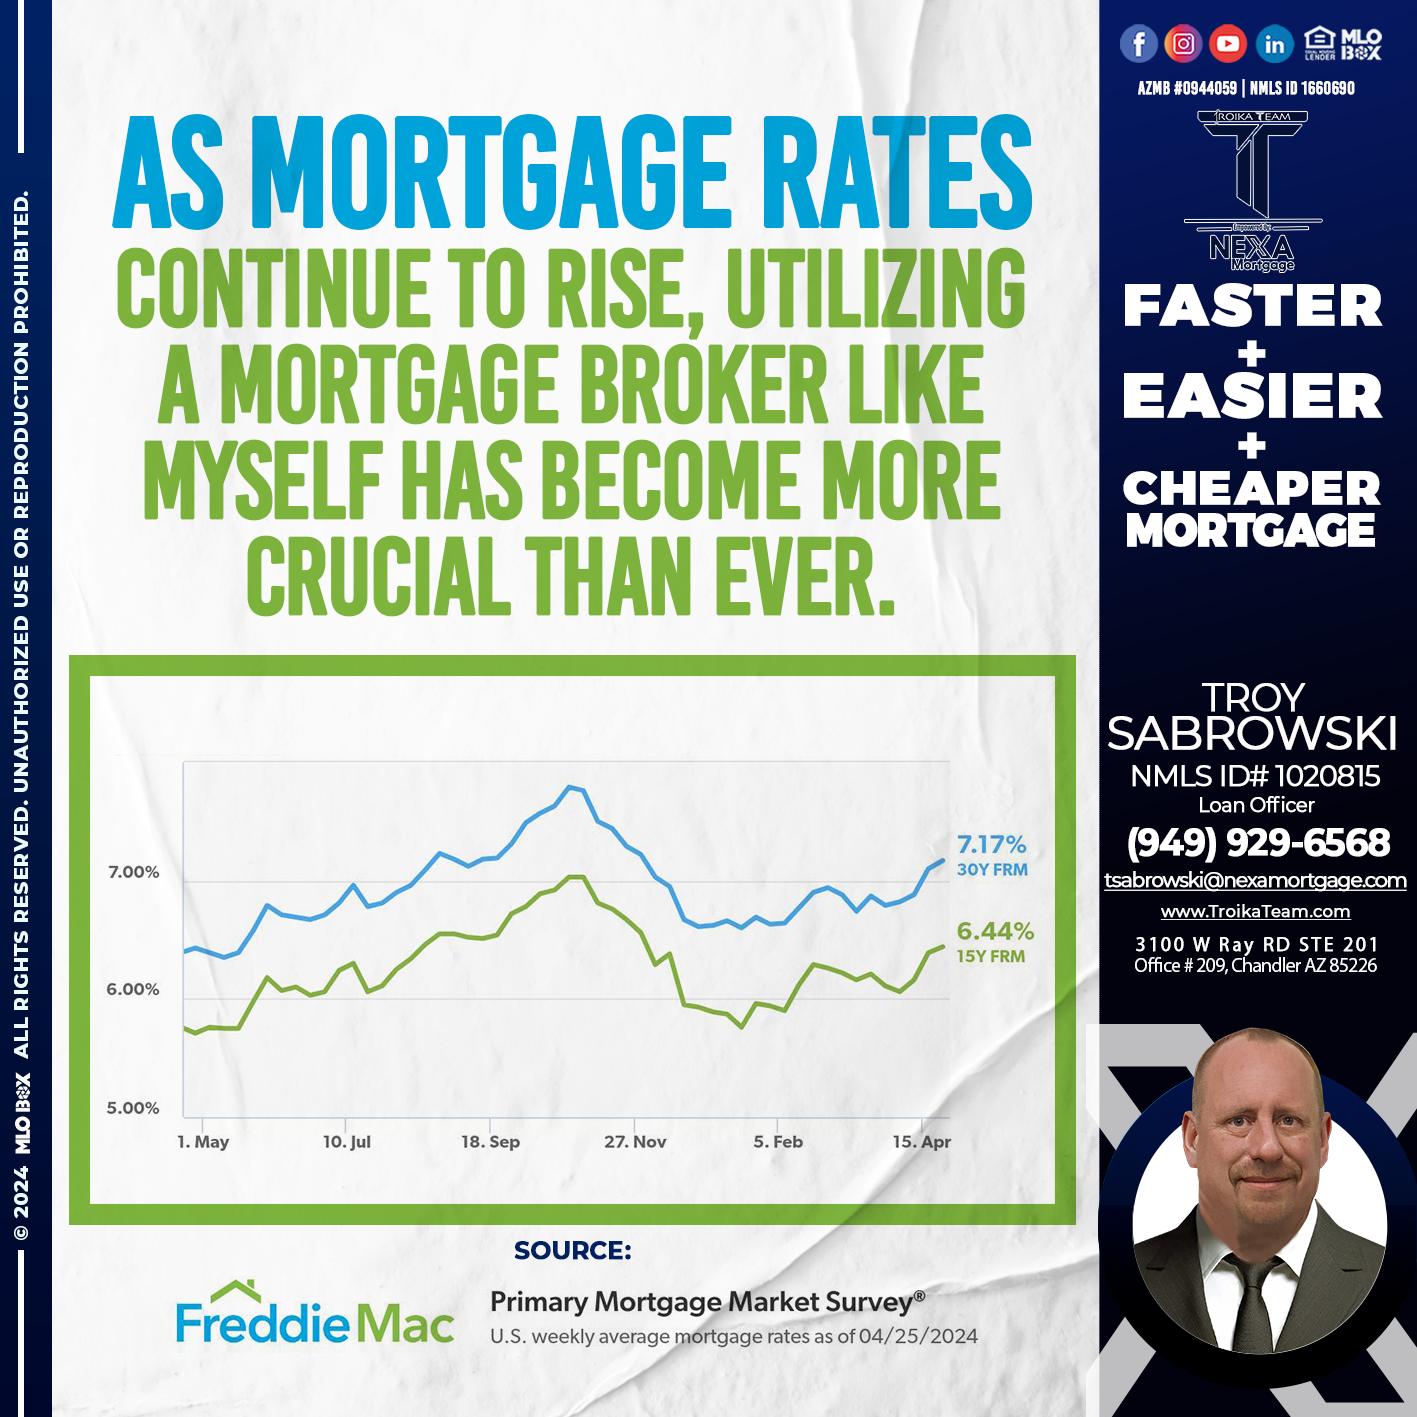 mortgage rates - Troy Sabrowski -Loan Officer